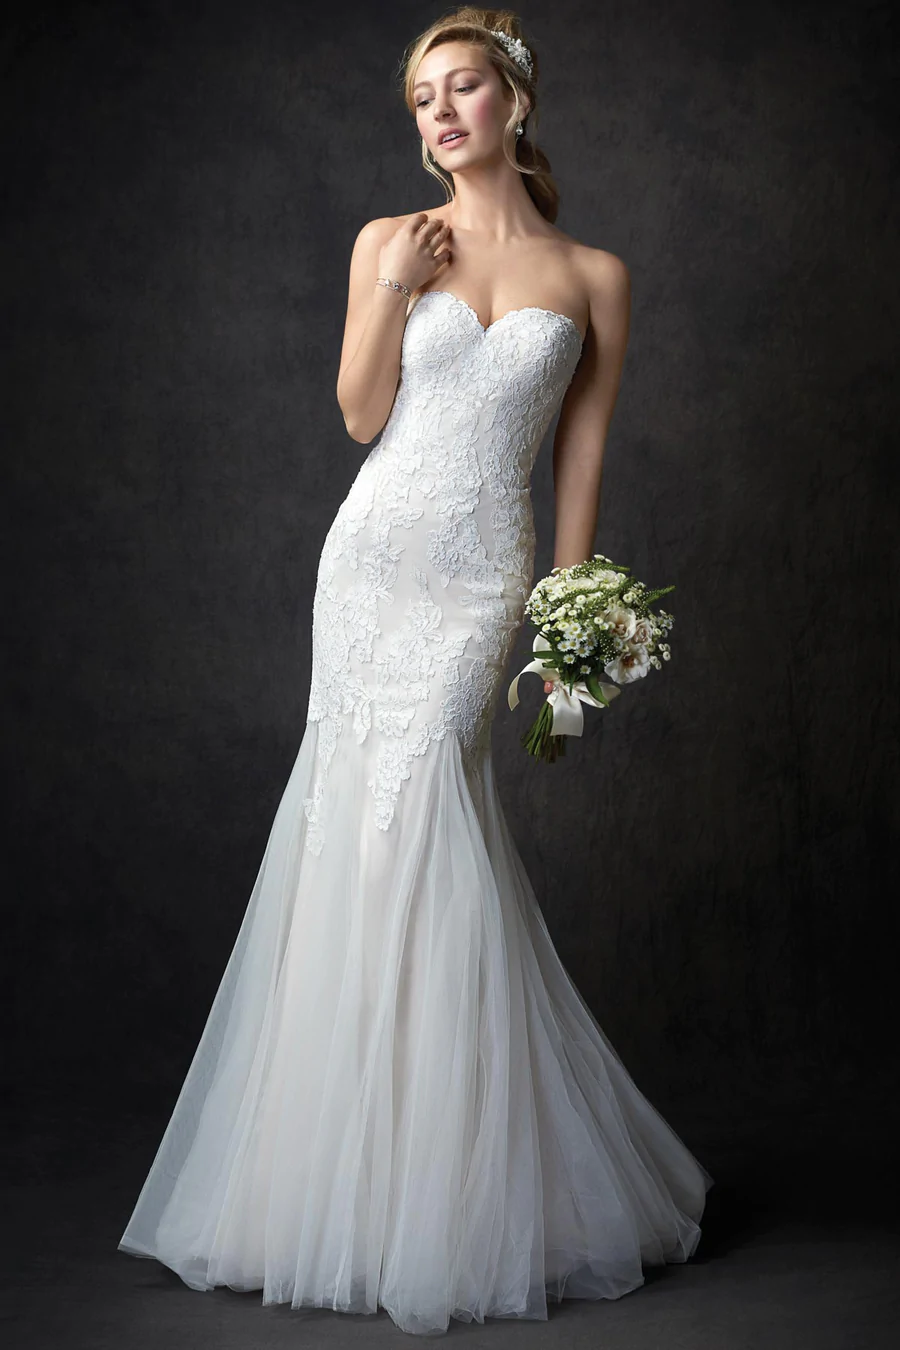 gallery Archives - Foothills Wedding Boutique and Formal Wear